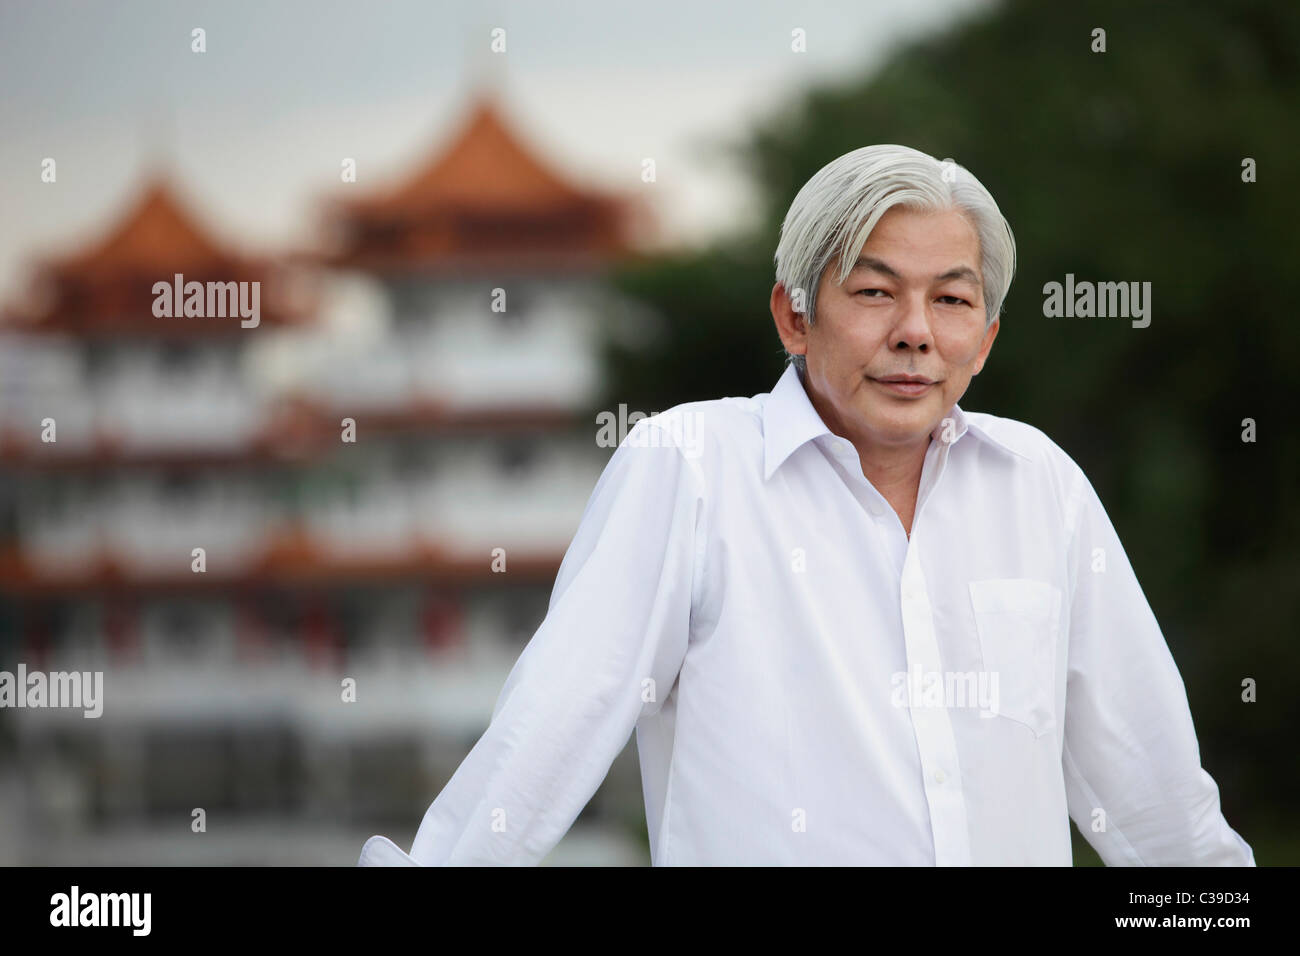 Older man standing outside in front of pagodas Stock Photo